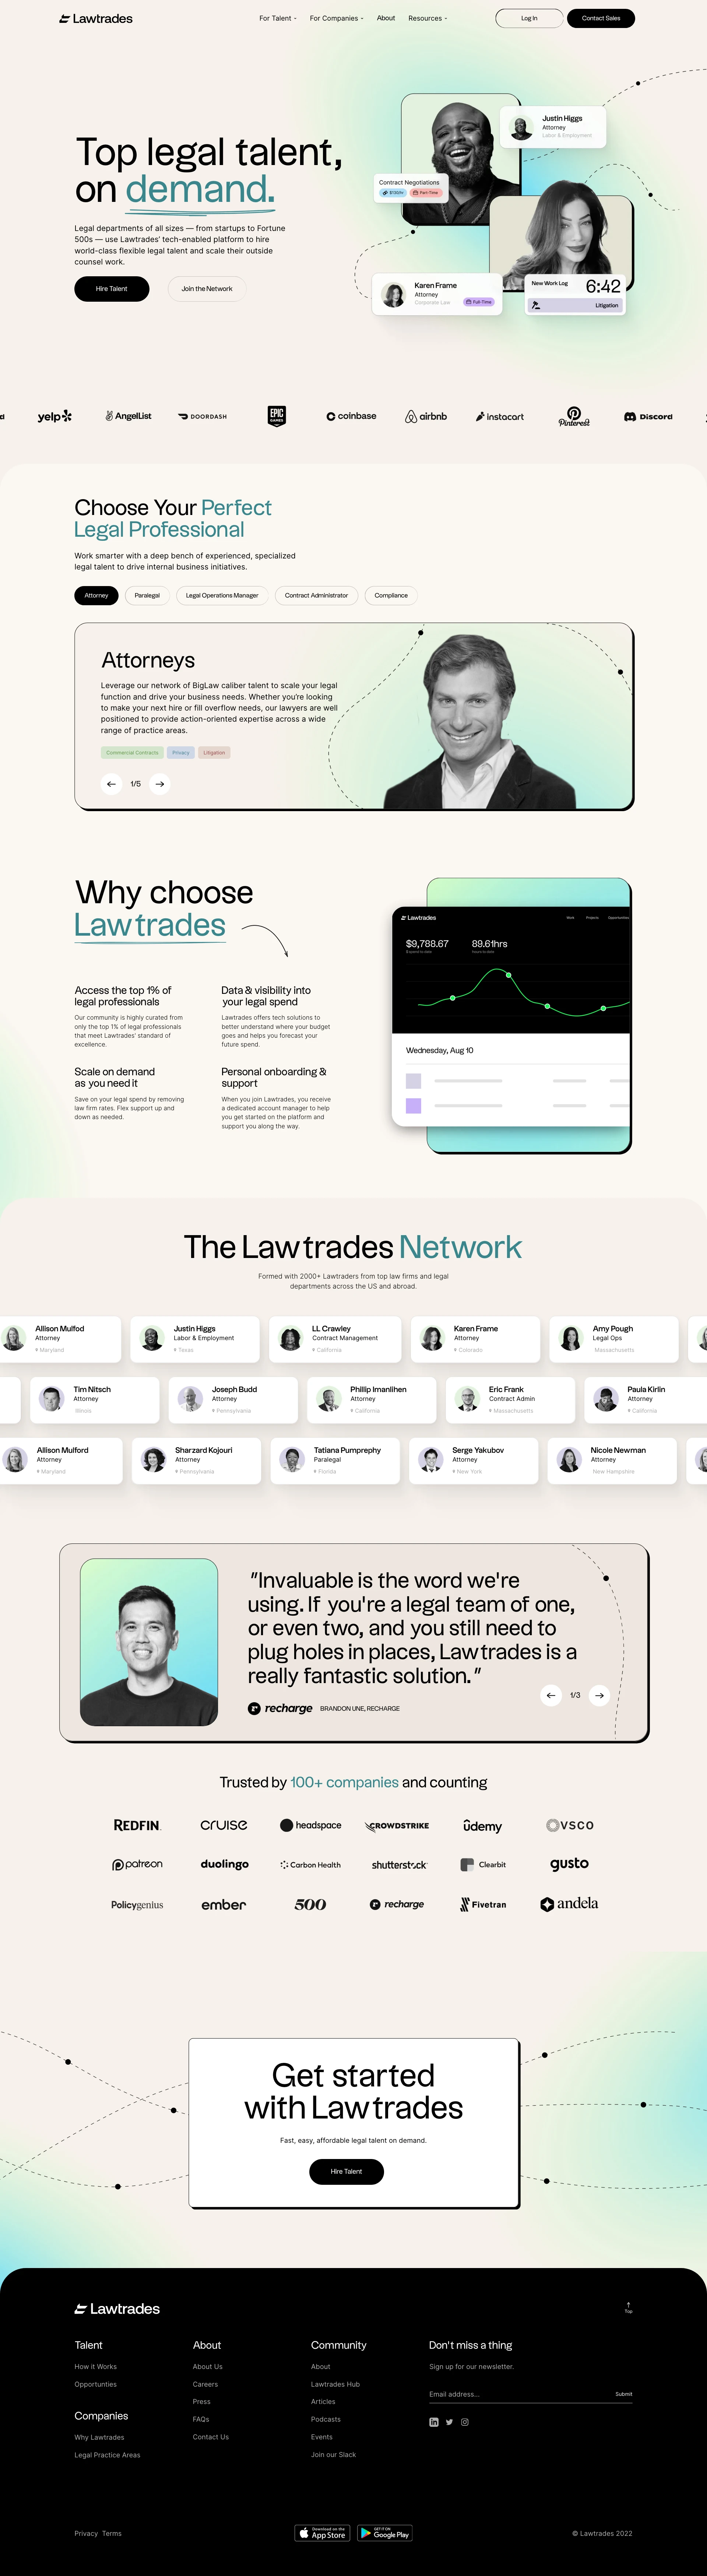 Lawtrades Landing Page Example: Top legal talent, on demand. Legal departments of all sizes — from startups to Fortune 500s — use Lawtrades’ tech-enabled platform to hire world-class flexible legal talent and scale their outside counsel work.